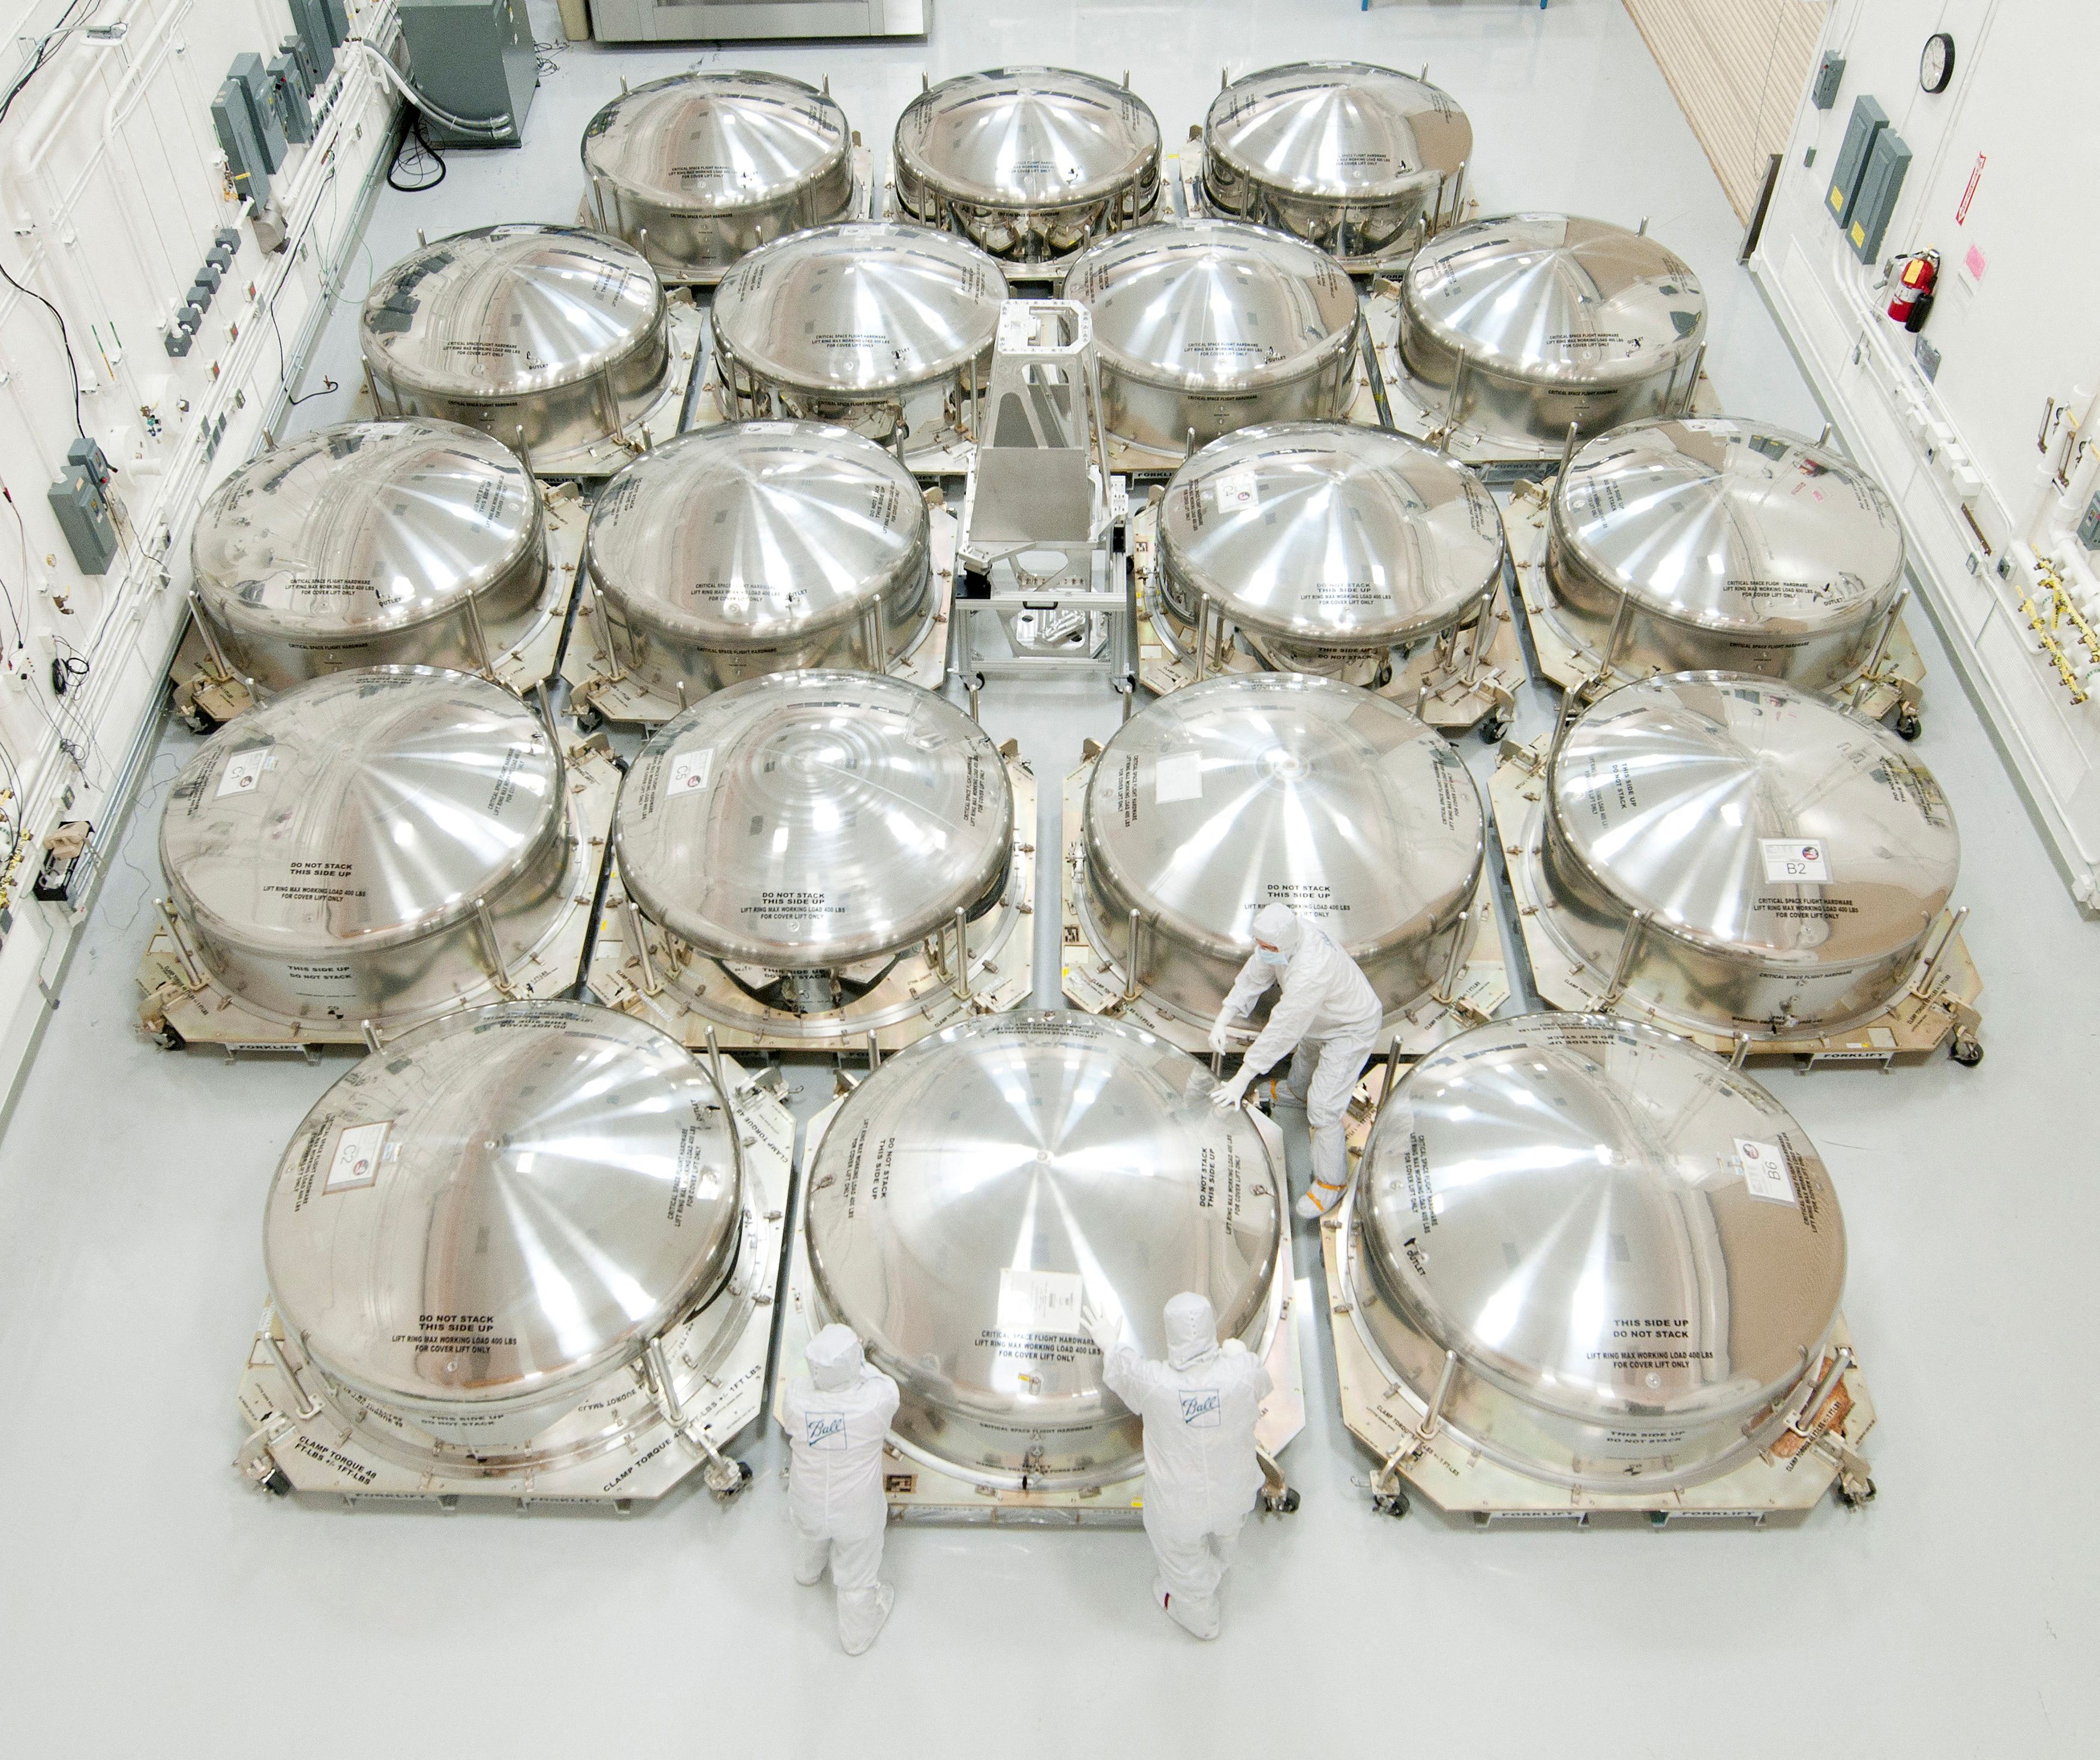 Mirror segments for NASA's James Webb Space Telescope are packed in special shipping canisters in Boulder